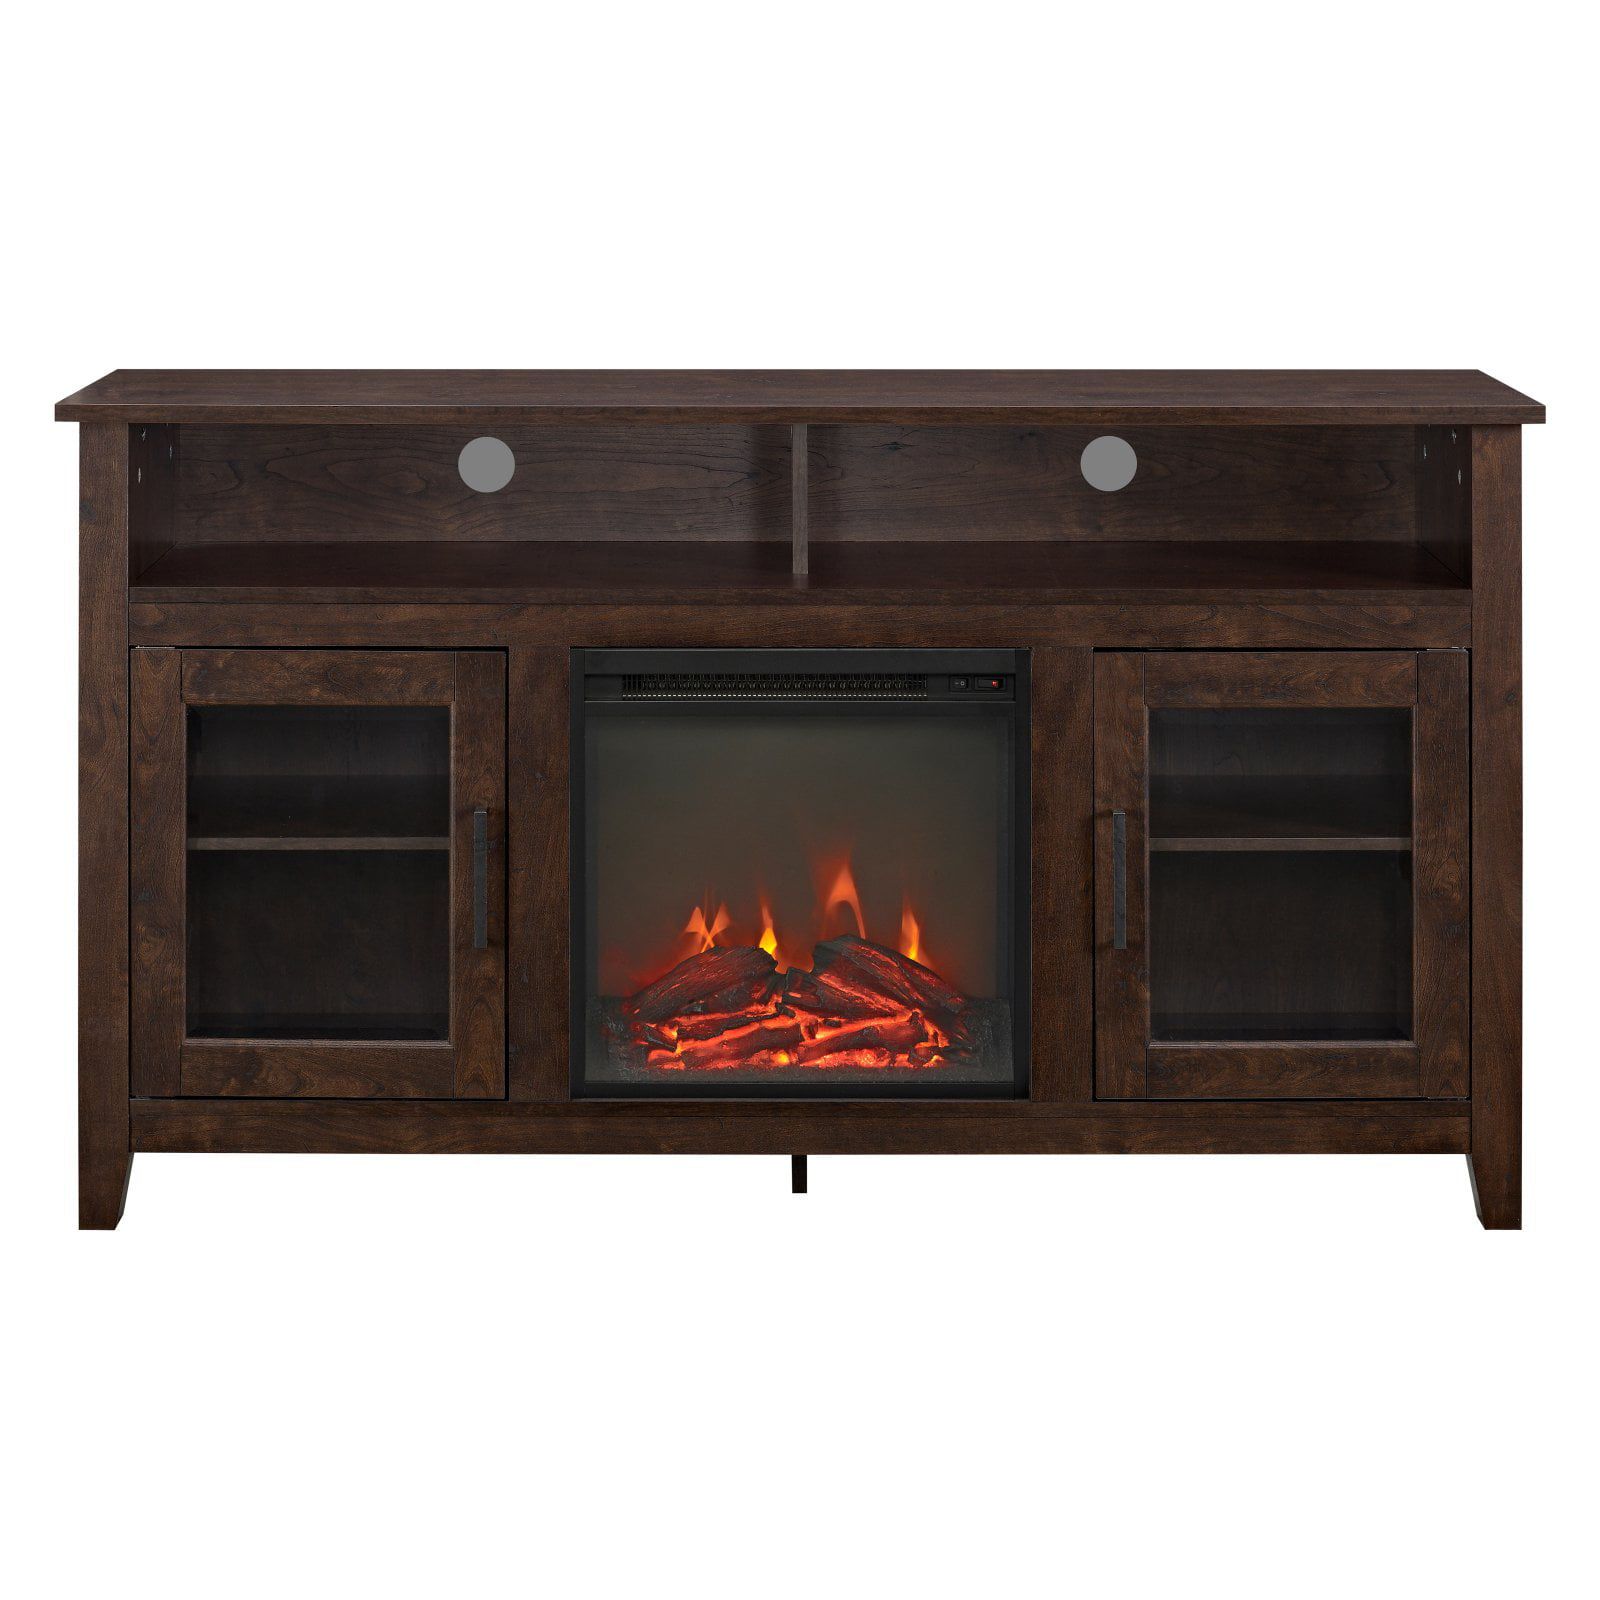 Walker Edison 58 In. Wood Highboy Fireplace Media Tv Stand Console Within Wood Highboy Fireplace Tv Stands (Gallery 6 of 20)